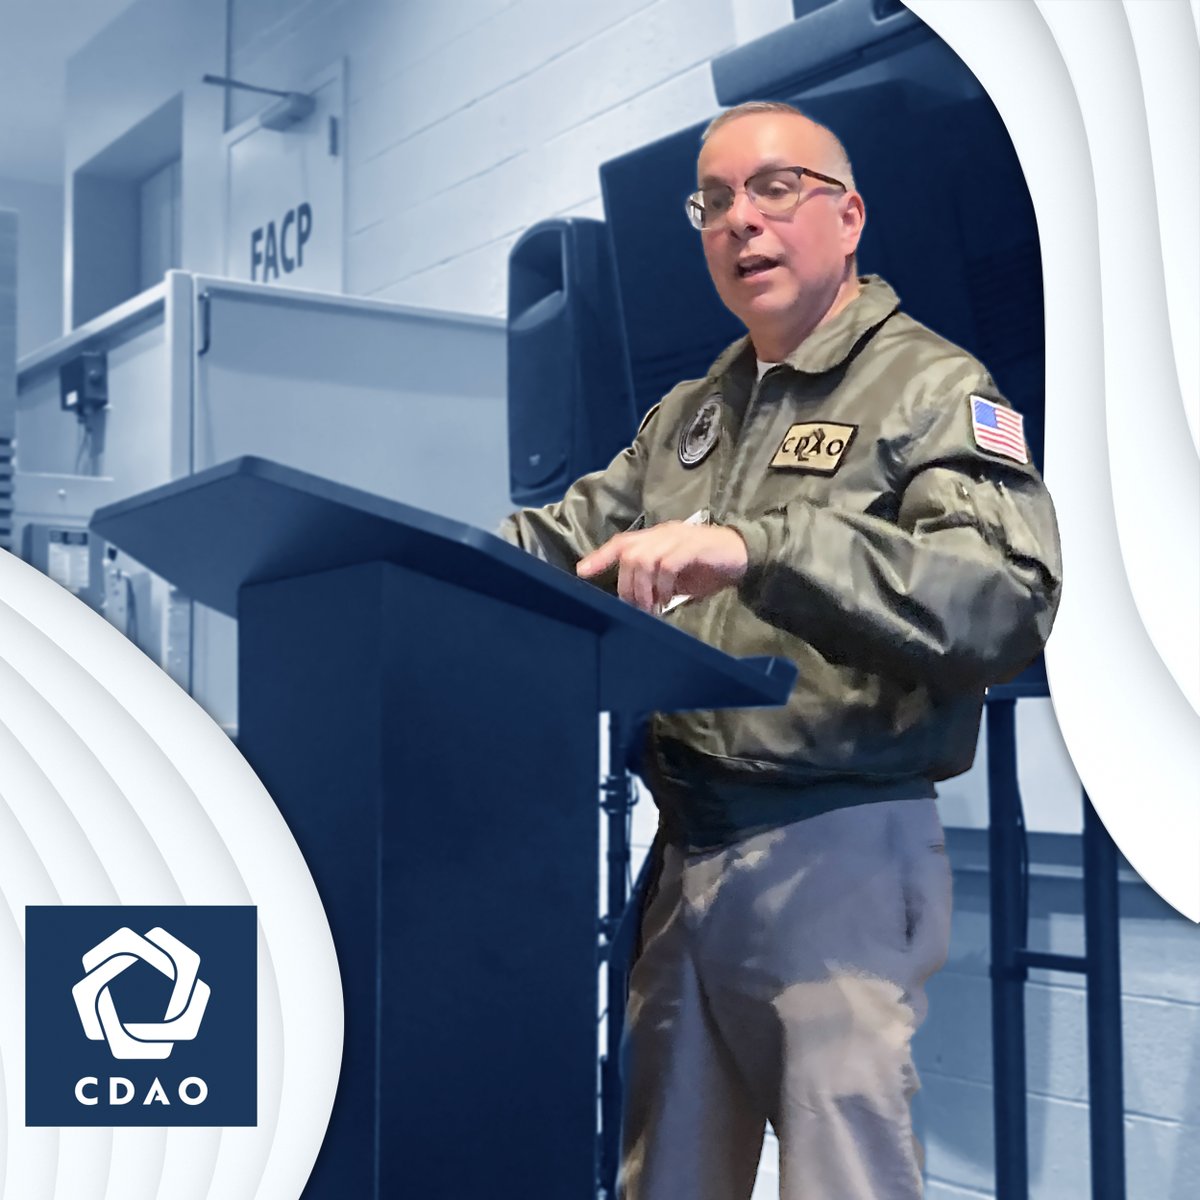 Task Force Lima mission commander CAPT 'X' Lugo dropped in to @theFINND's monthly talk series yesterday to speak about the task force's efforts and way ahead. The audience engagement and questions were a productive highlight of the evening!